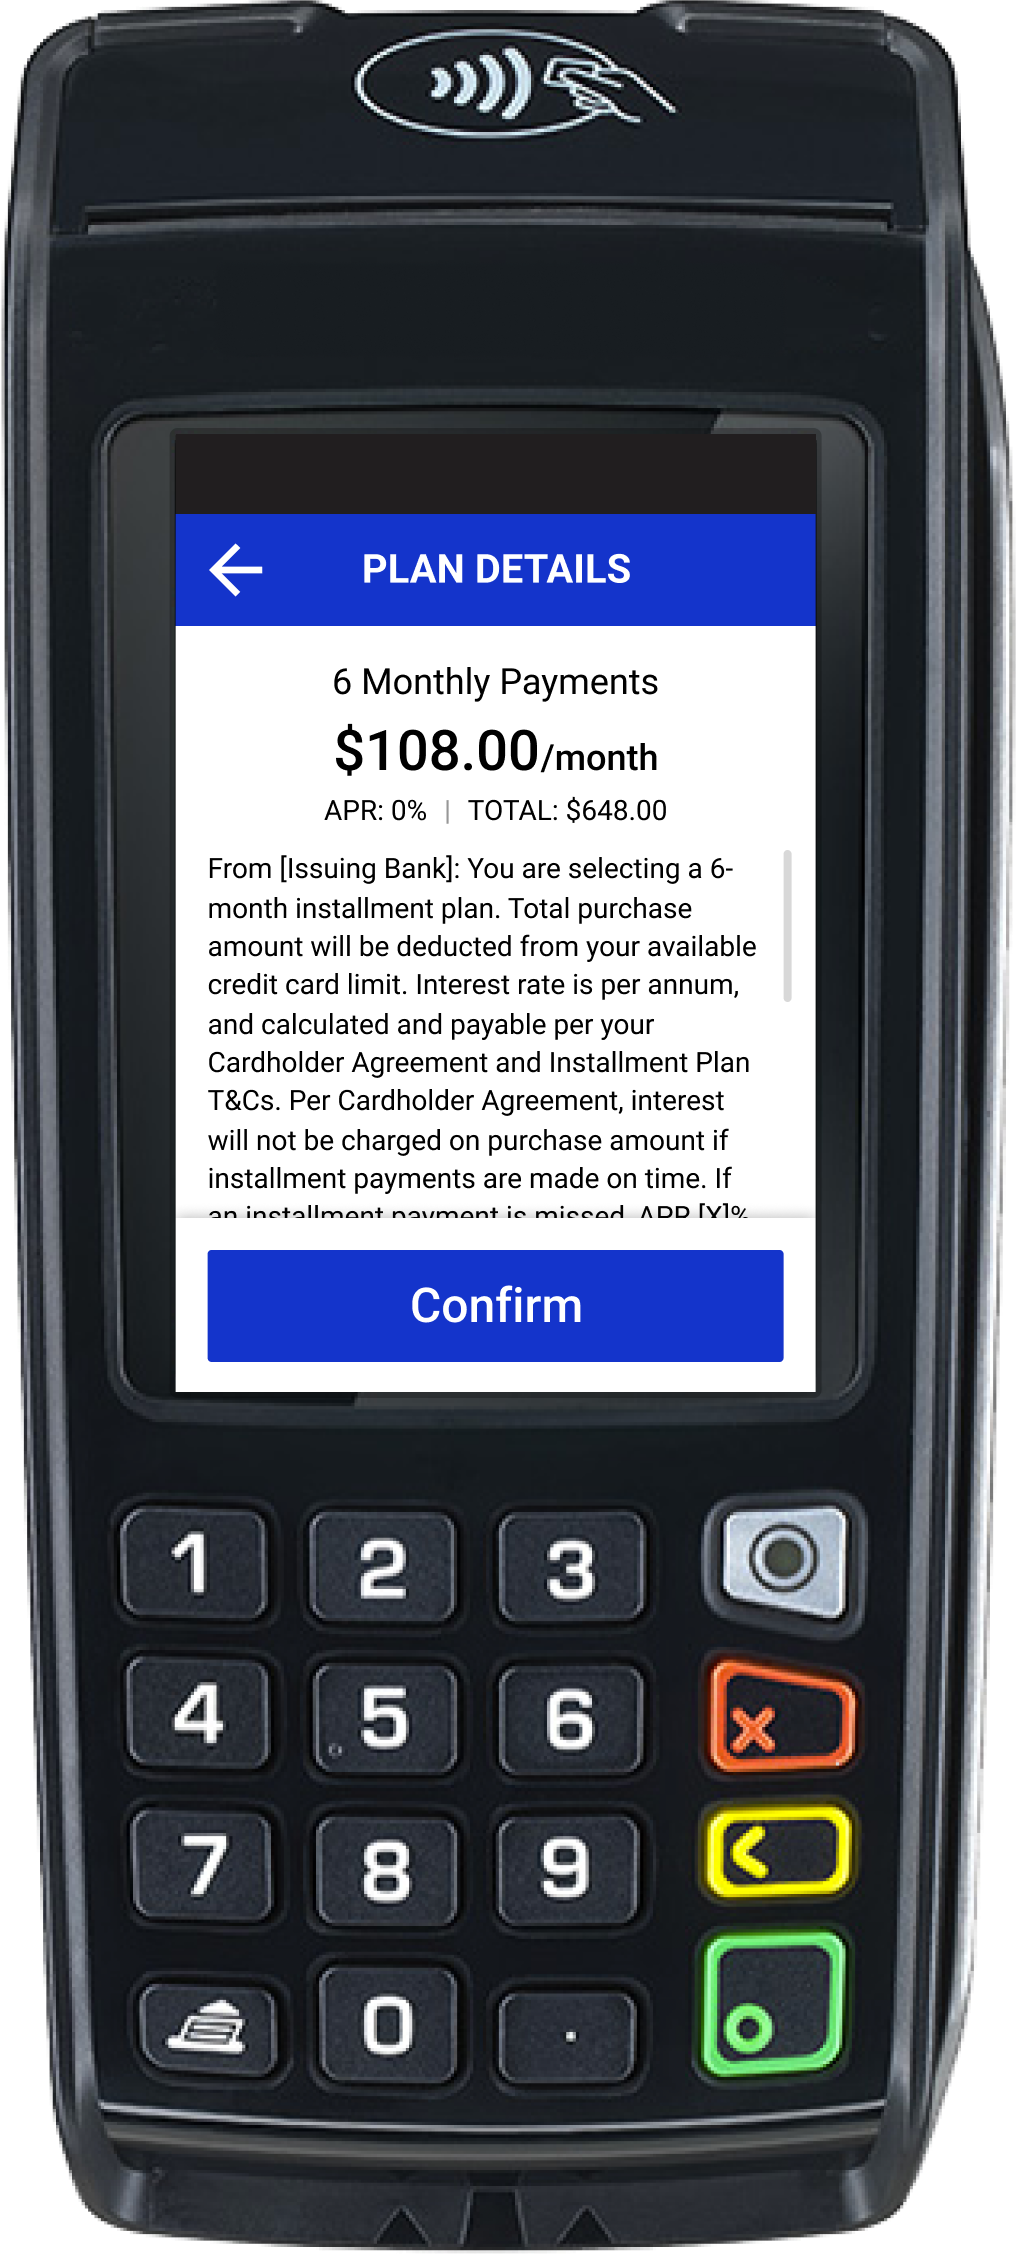 Canada portrait 2 style payment terminal, review terms and conditions